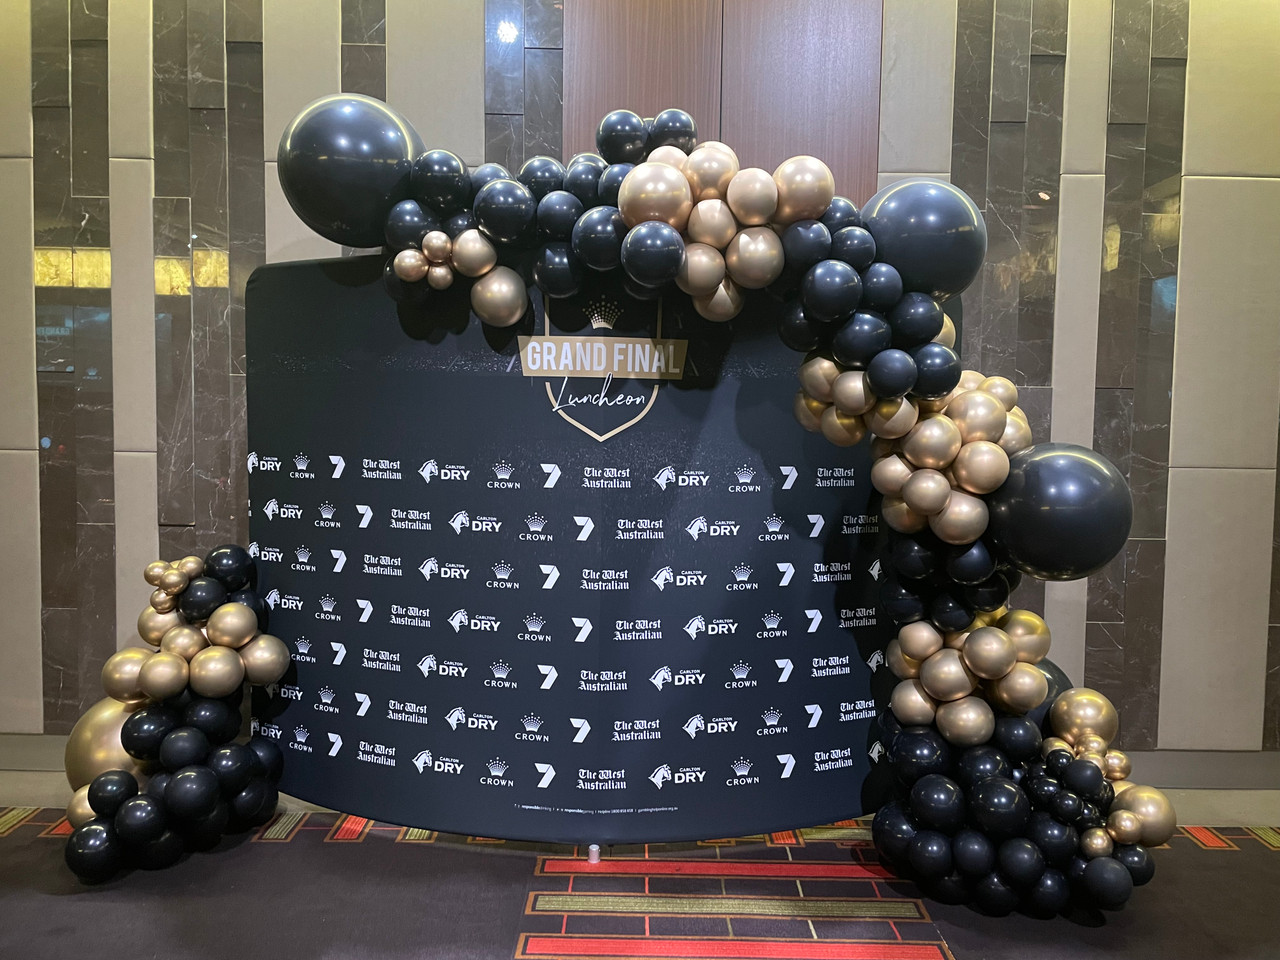 BALLOON GARLAND INCL CHROME BALLOONS- $130 PER MTRE DEL EXTRA BACKDROP EXTRA PICTURE- 6 METER @$130.00 PER MTR